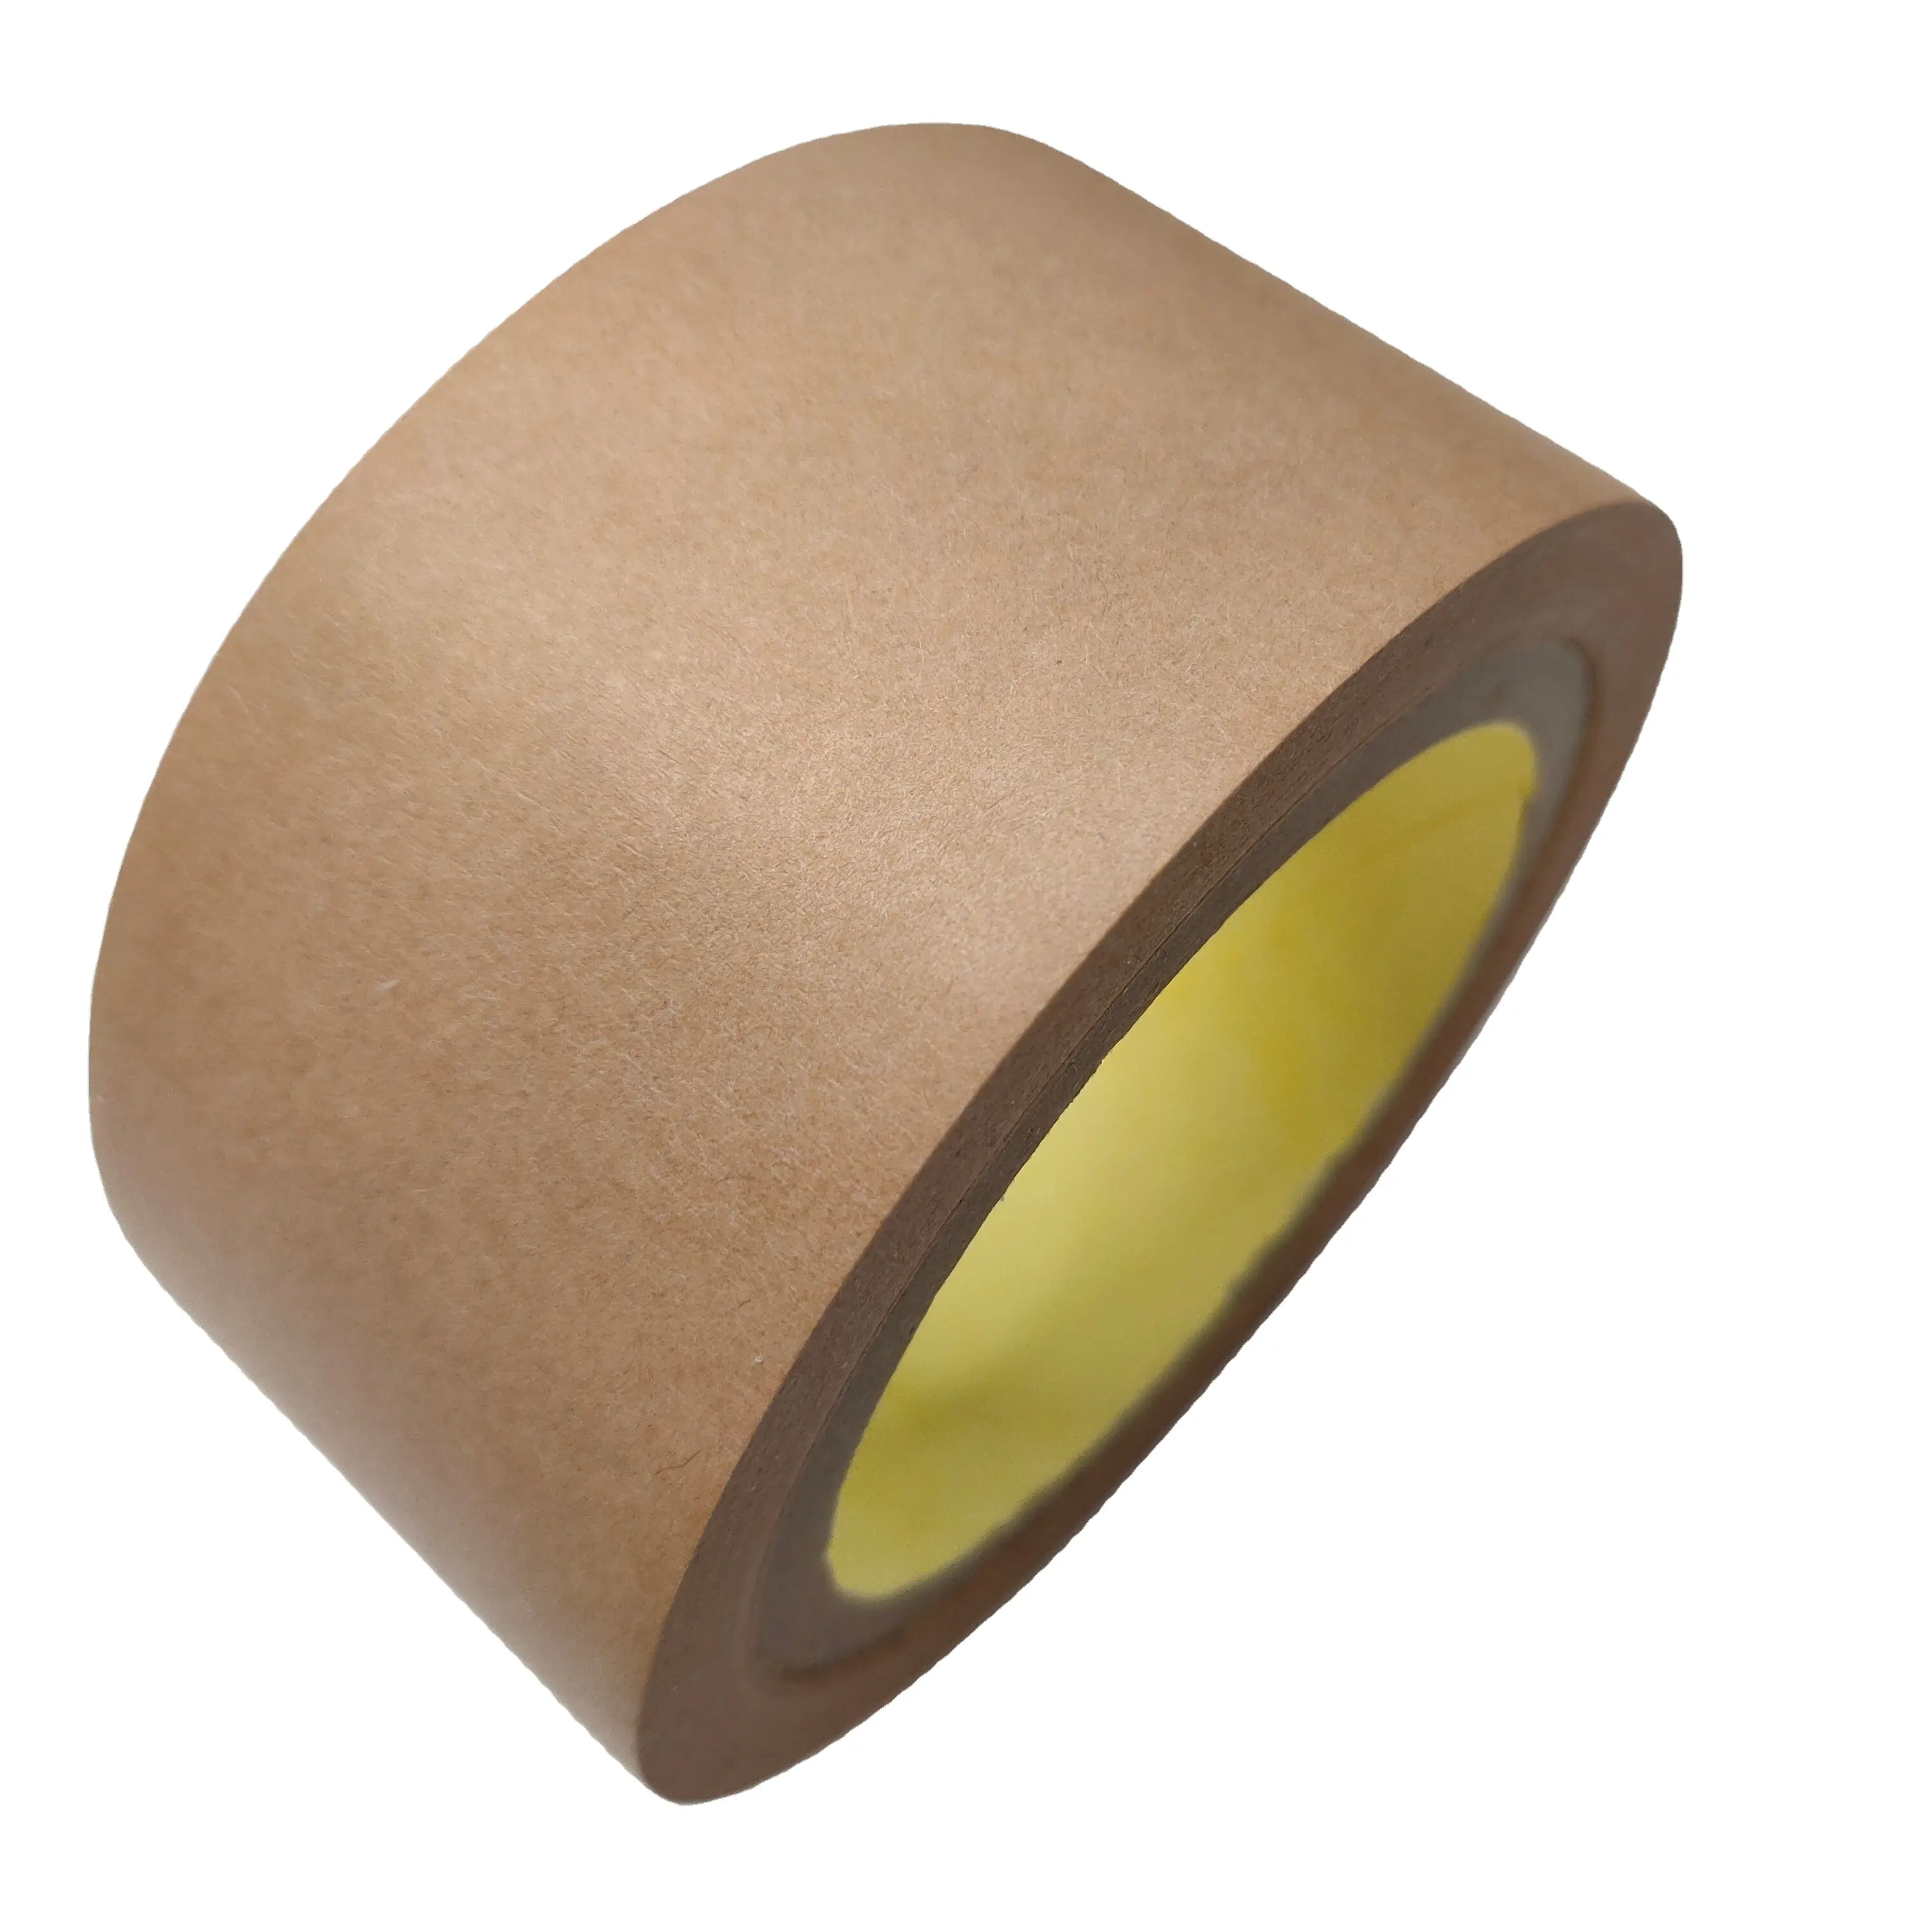 Supplier Adhesive Manufacturer Adhesive Self Gummed Reinforce Nature Material Reinforced Single Sided Kraft Paper Tape